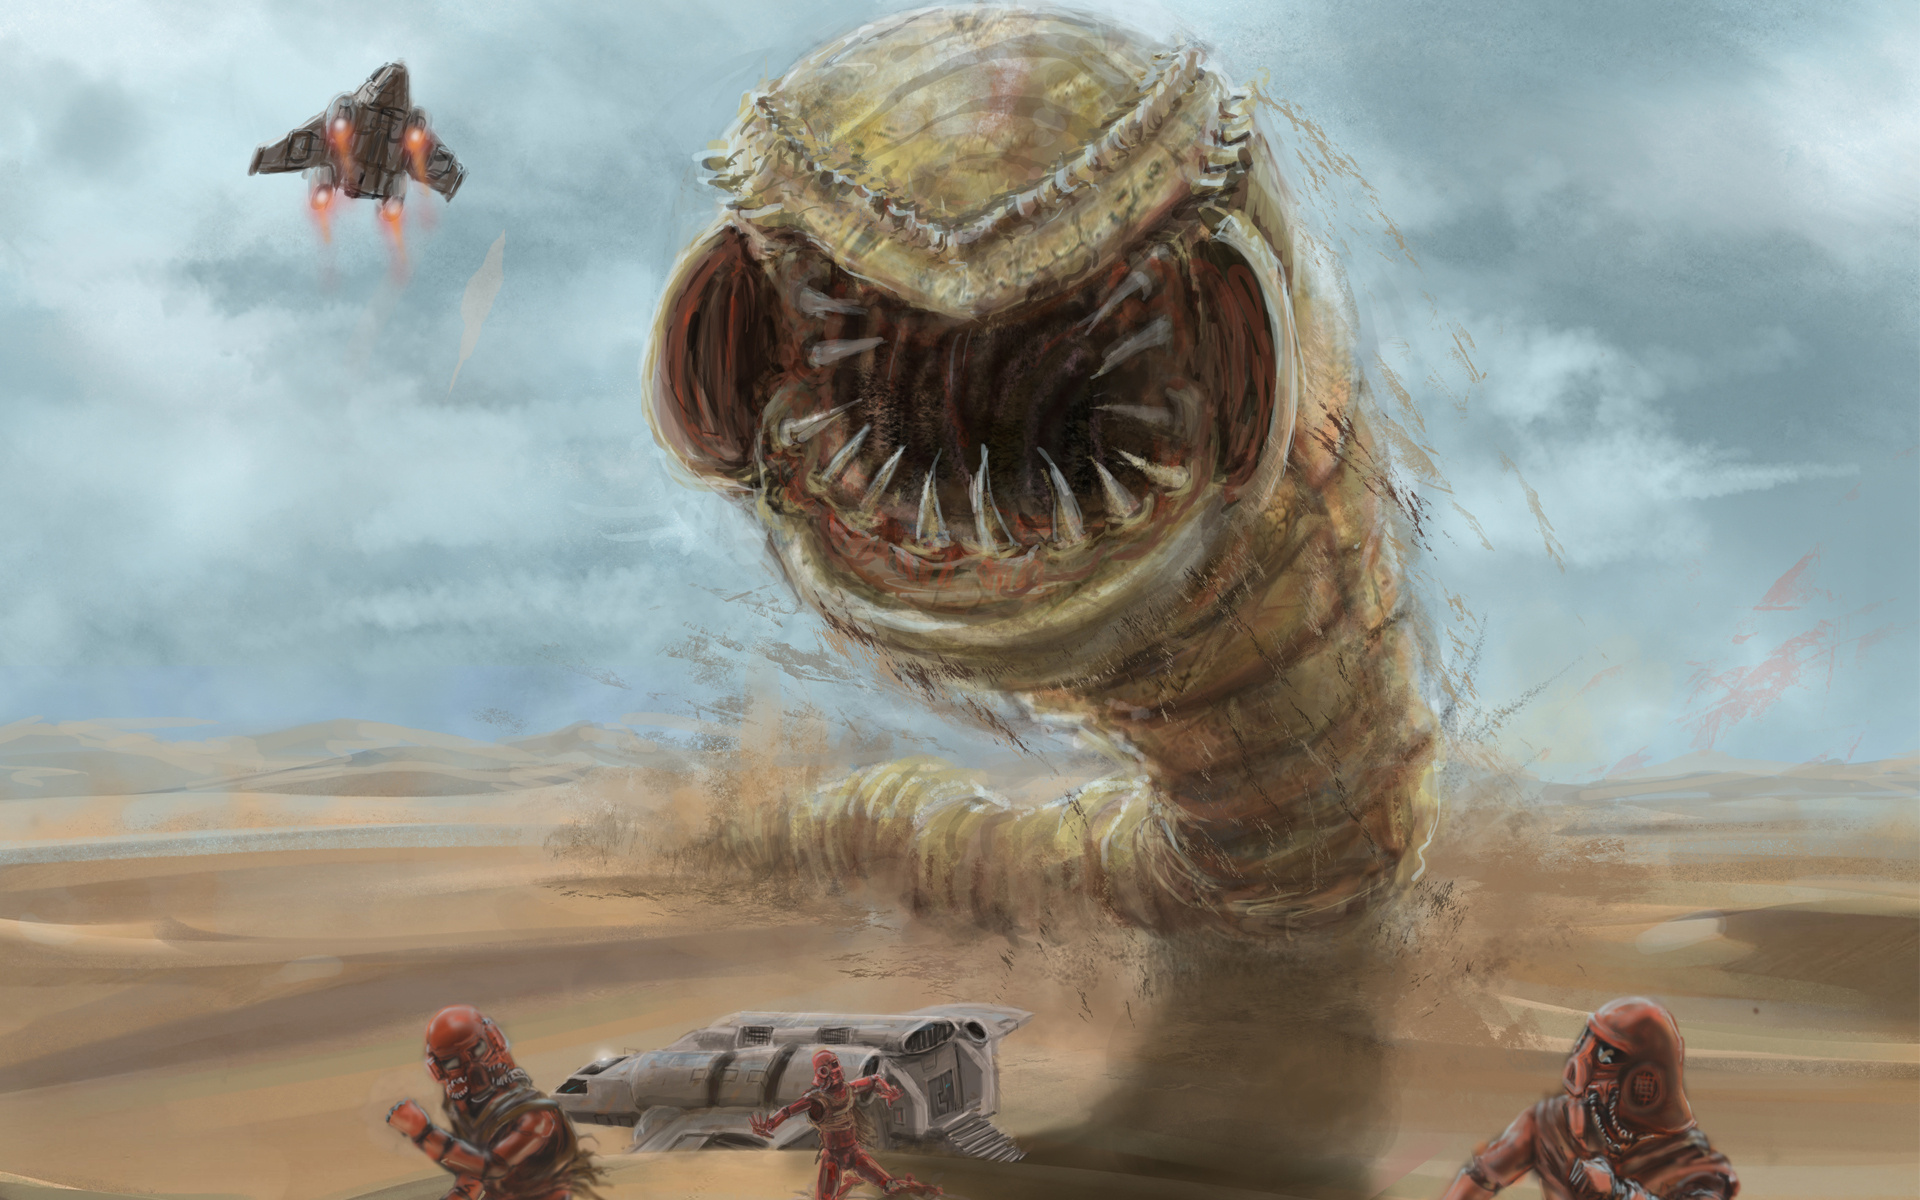 Worm From Dune - 1920x1200 Wallpaper 